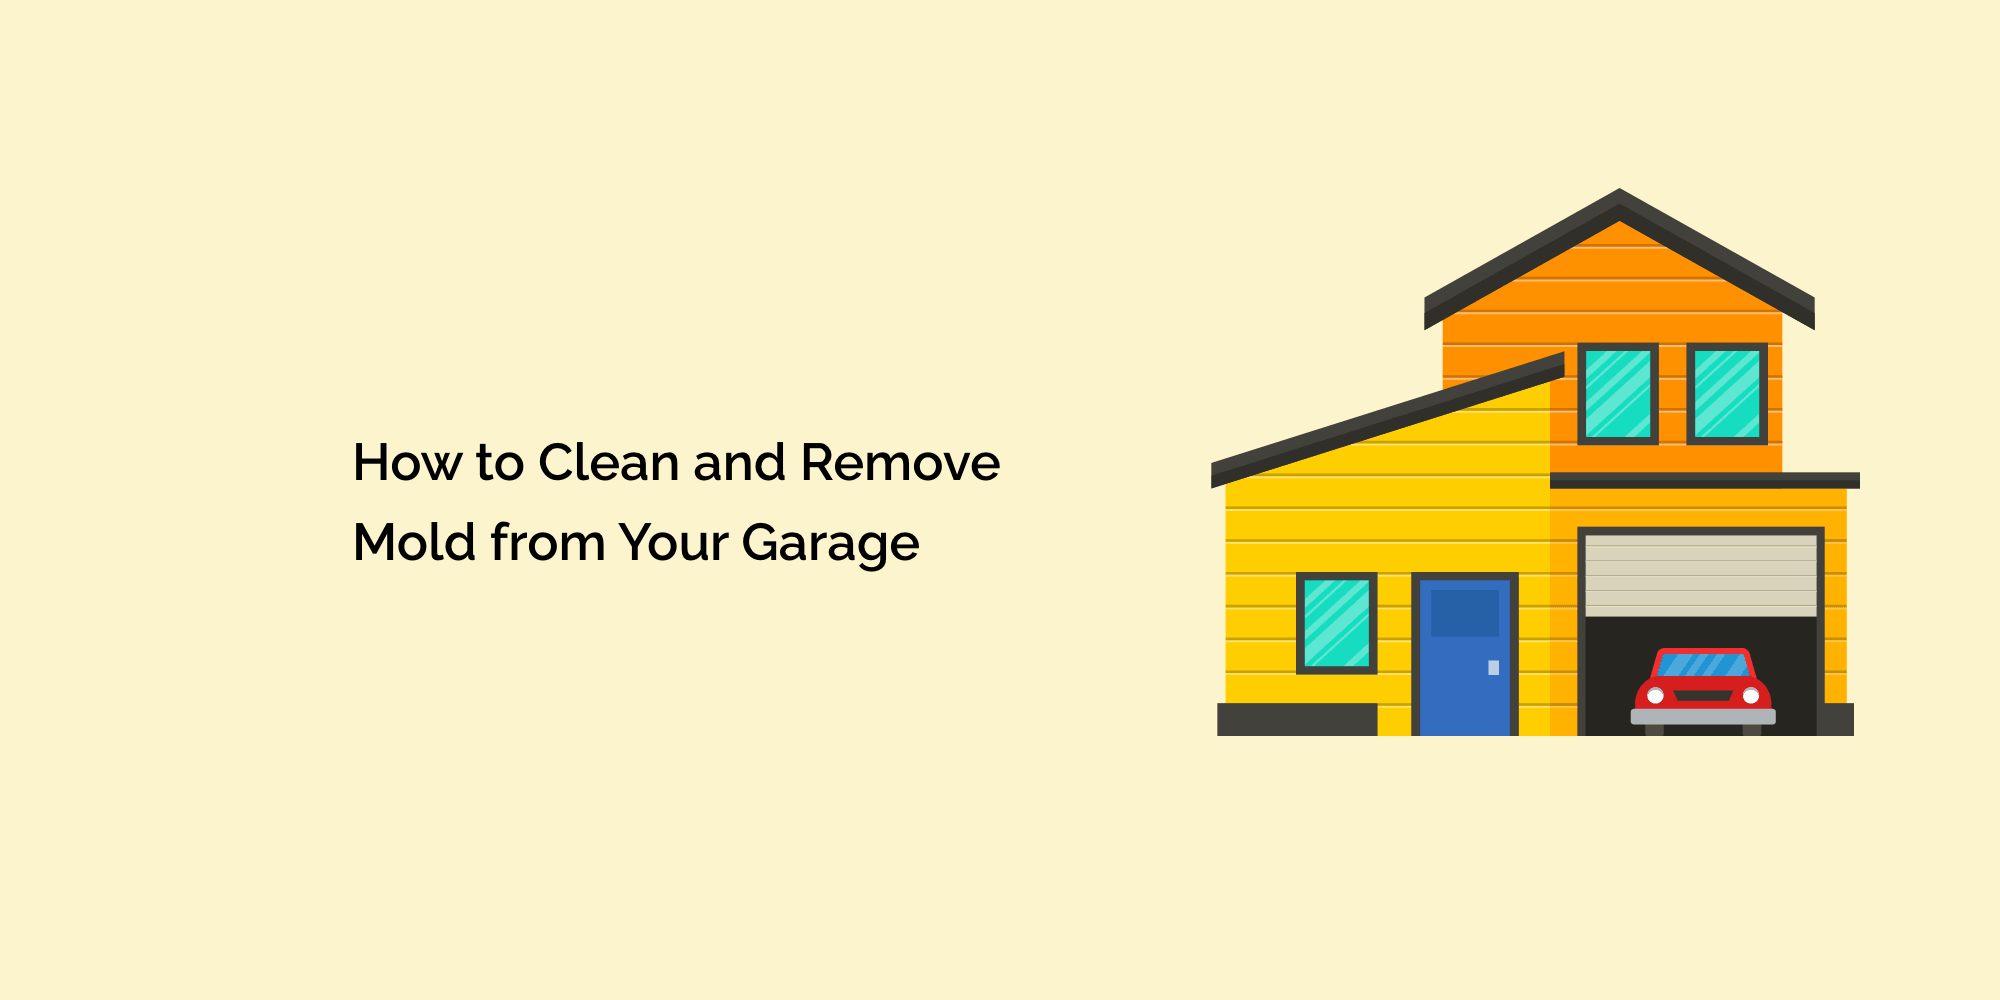 How to Clean and Remove Mold from Your Garage